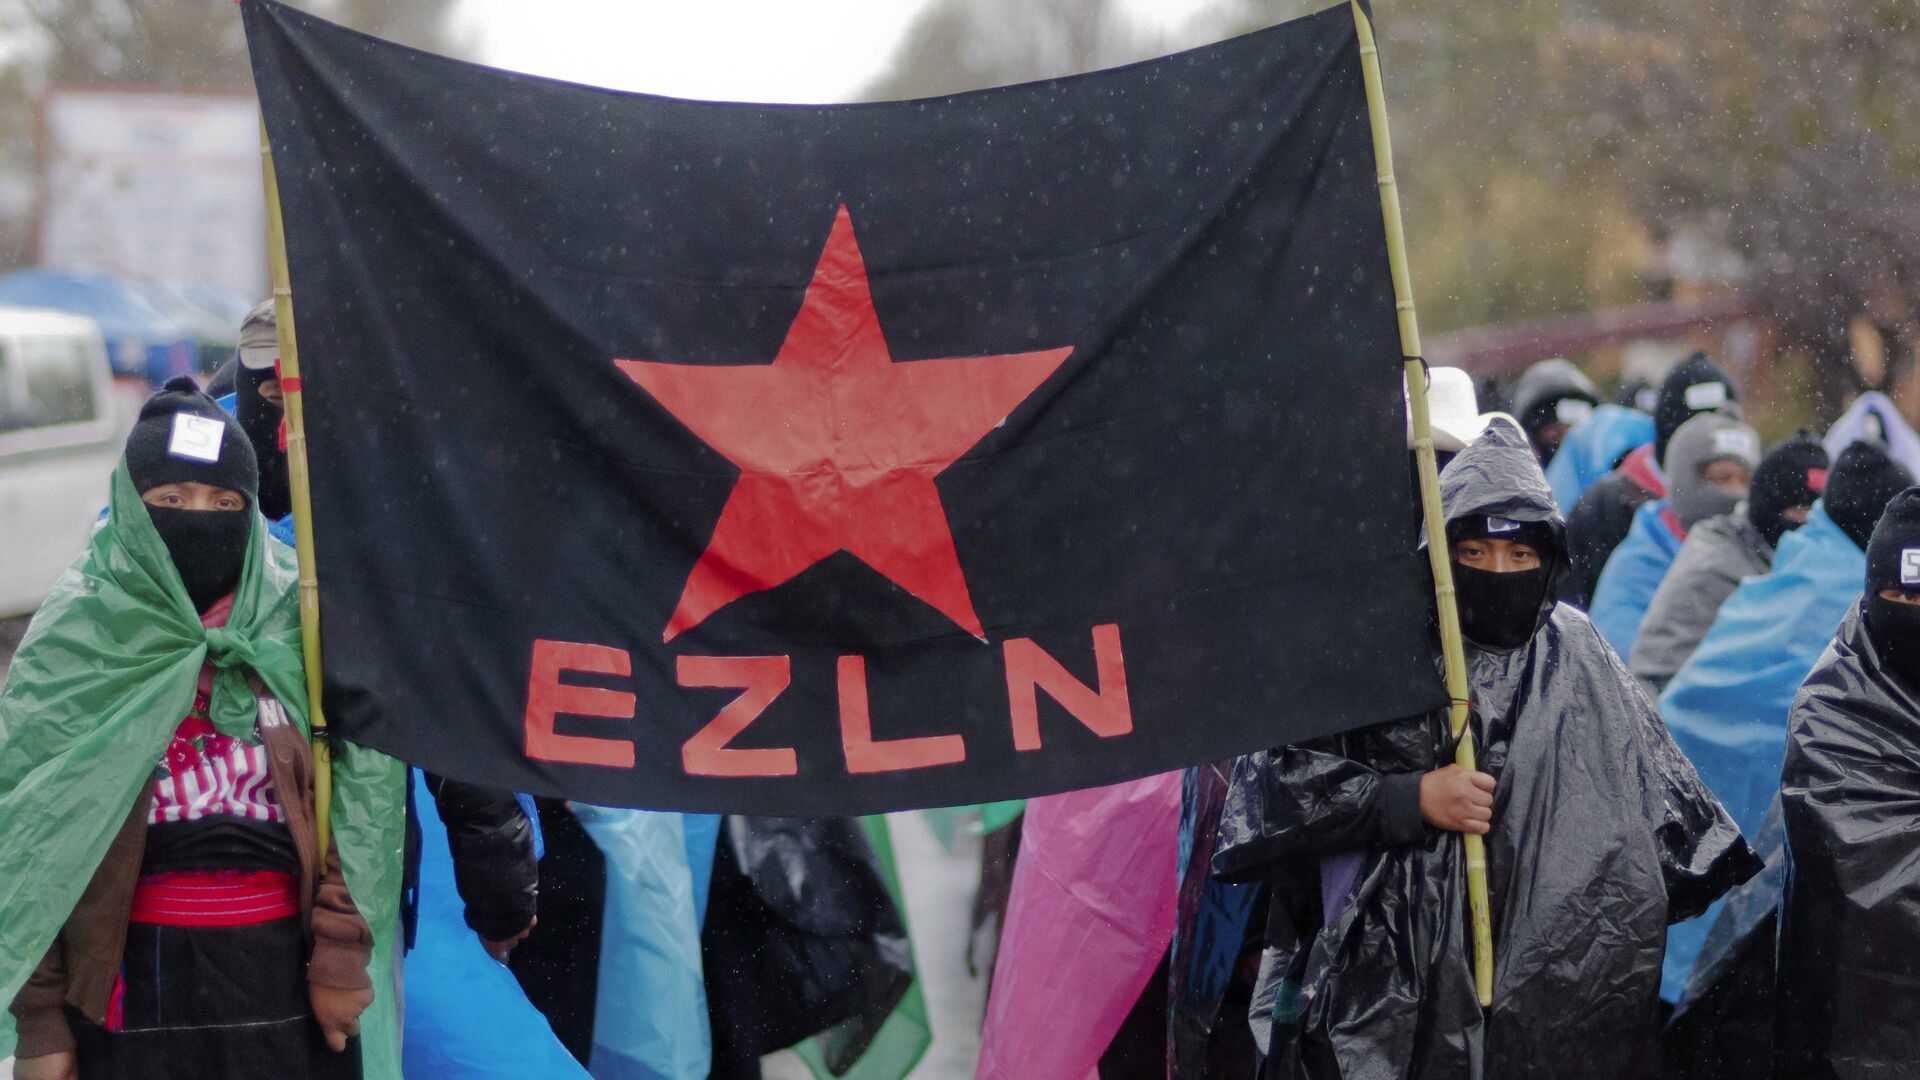 Mayan indigenous people with their faces covered, hold a flag of the Zapatista Army of National Liberation (EZLN) during a march in San Critobal de las Casa, Chiapas state, Mexico on December 21, 2012, - Sputnik Mundo, 1920, 24.09.2021